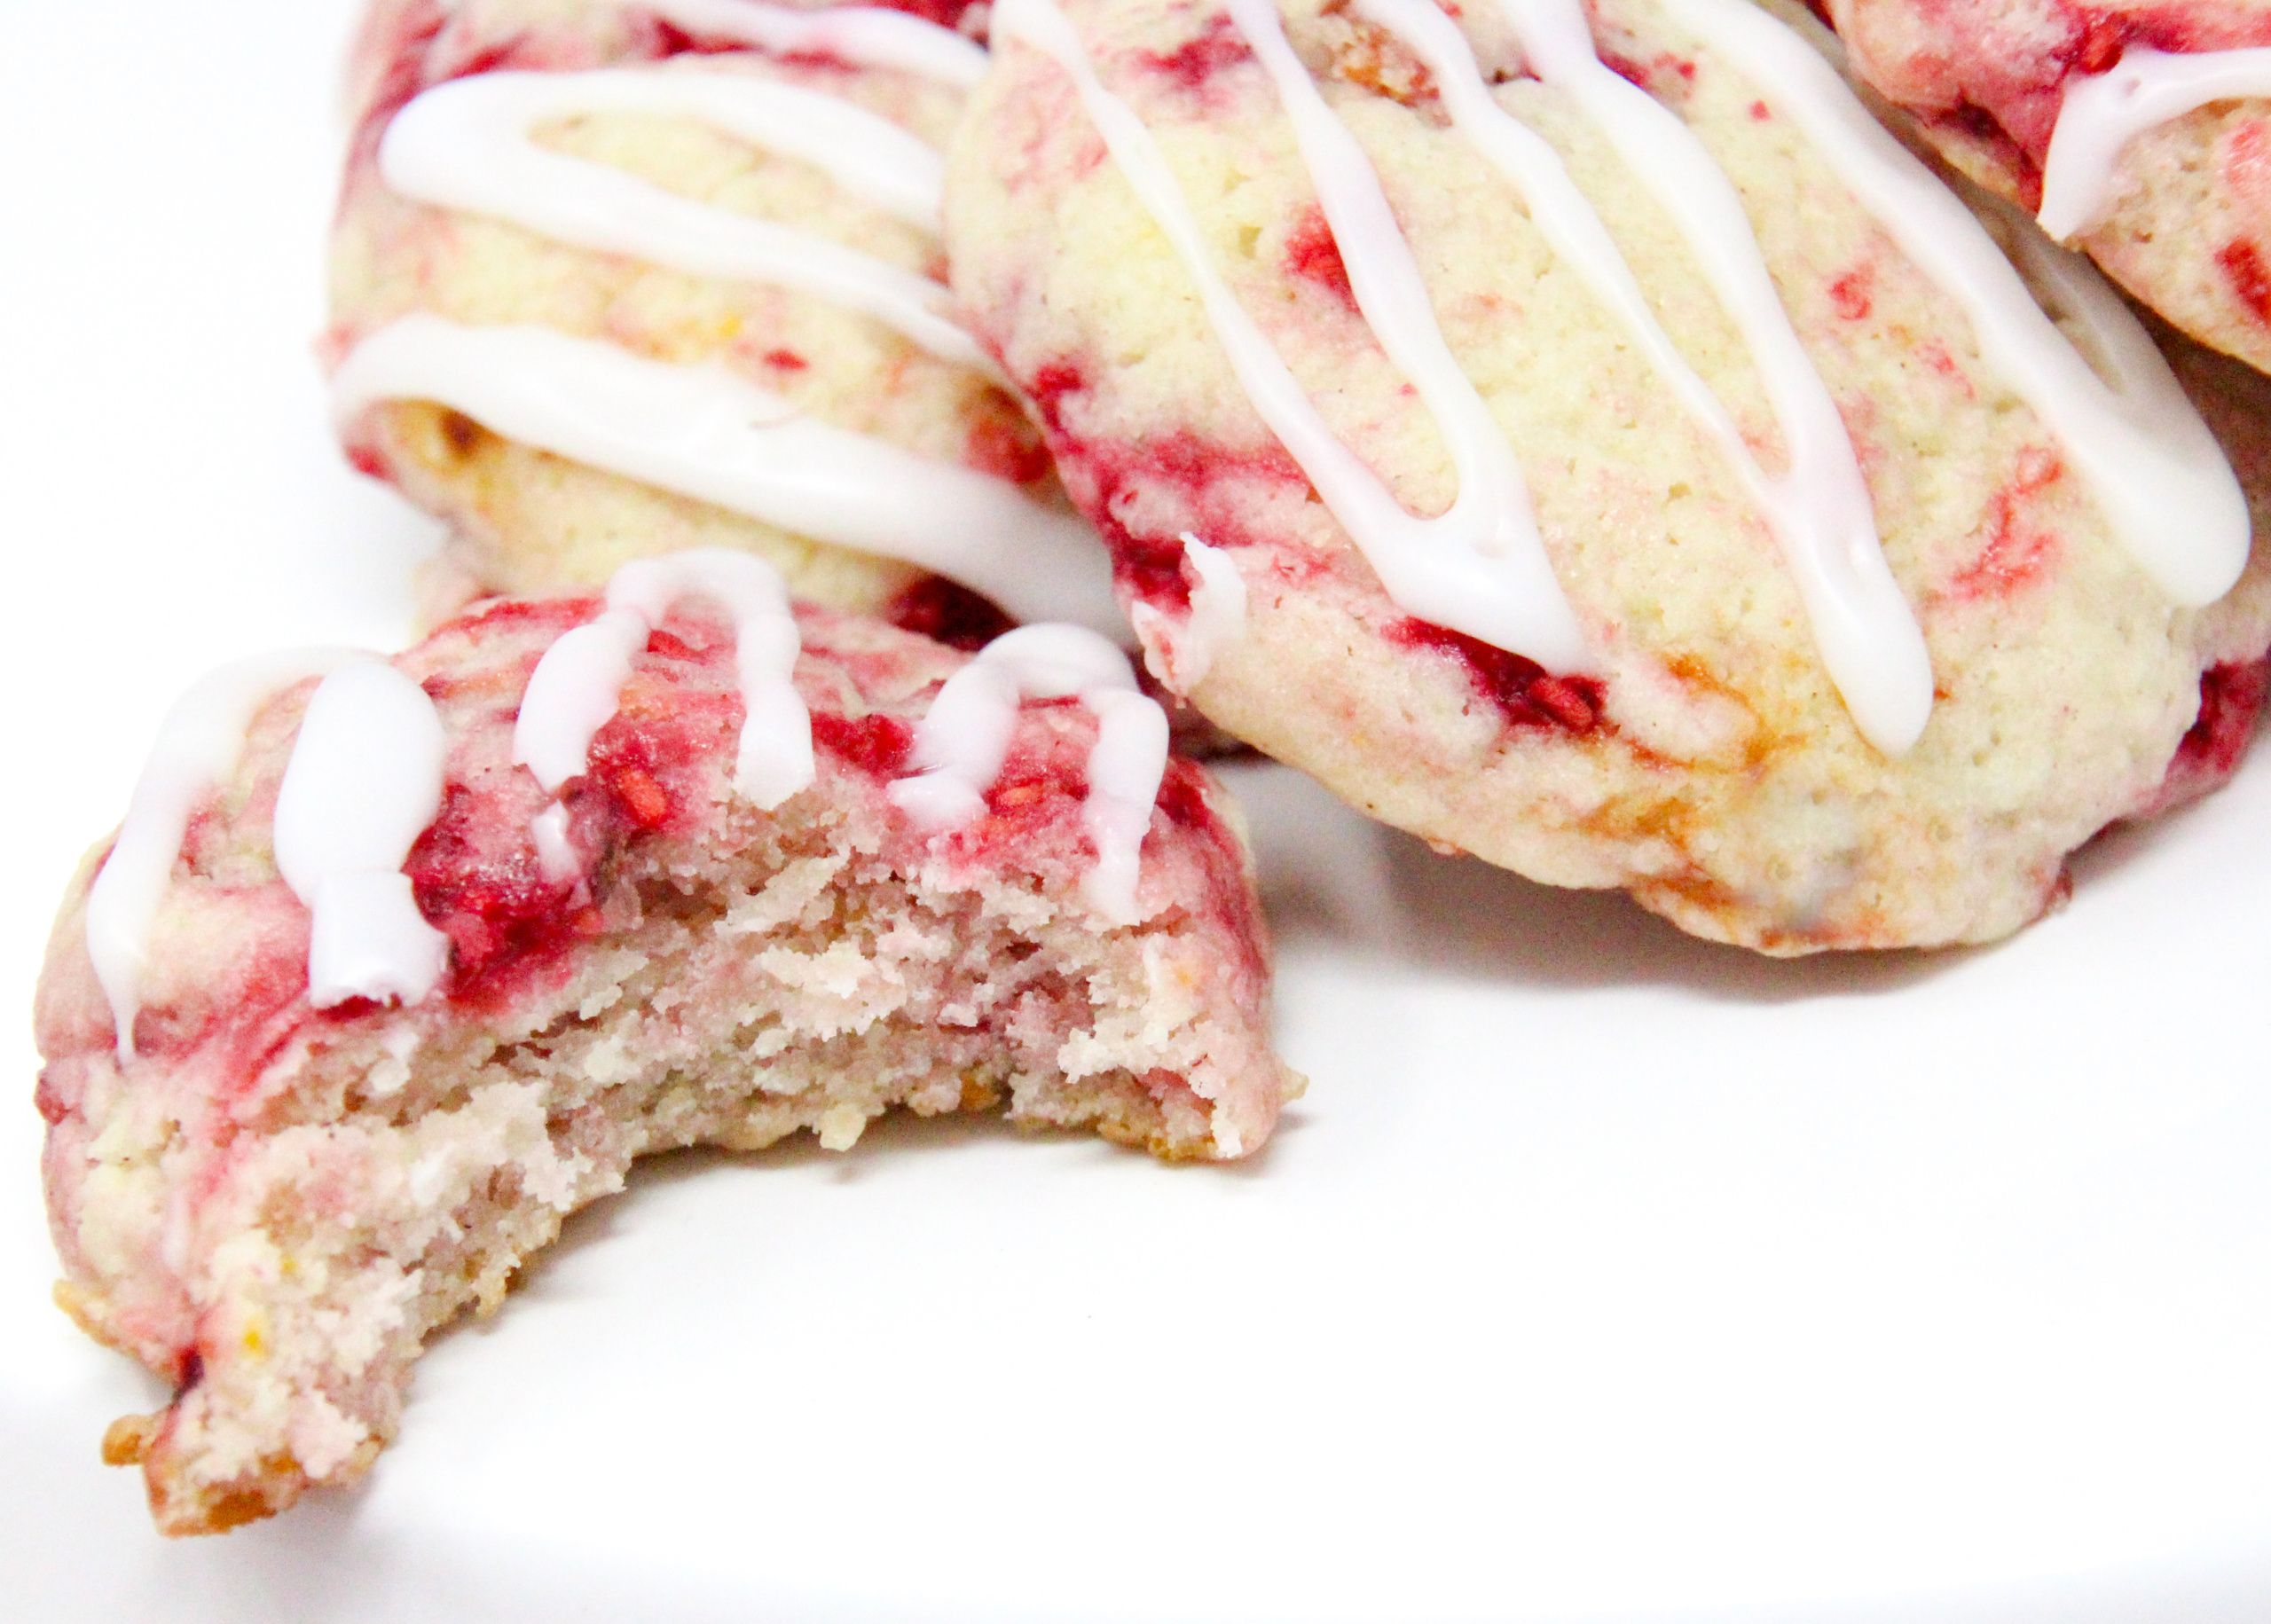 Lemon Raspberry Delights are a cake-like cookie filled with bits of real raspberries that complement the tart flavor of lemon. Recipe shared with permission granted by Daryl Wood Gerber, author of A TWINKLE OF TROUBLE. 